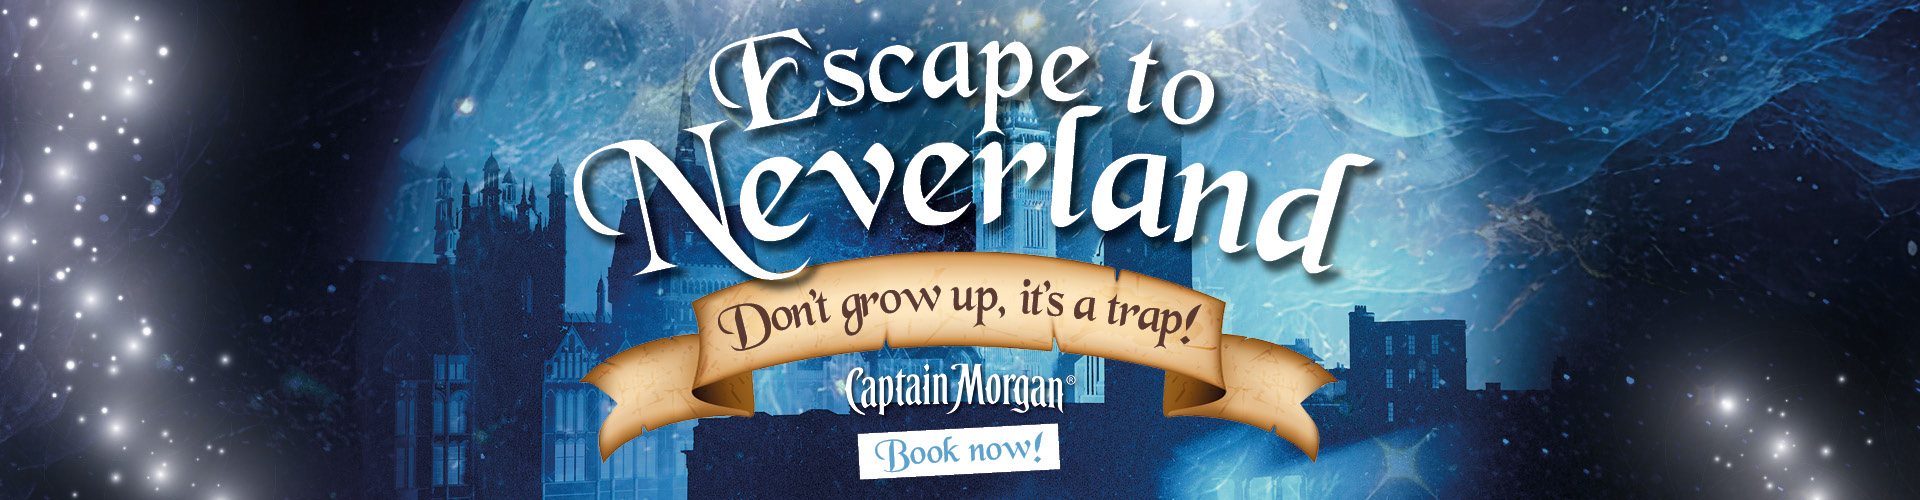 Escape to Neverland this NYE at Popworld Sheffield